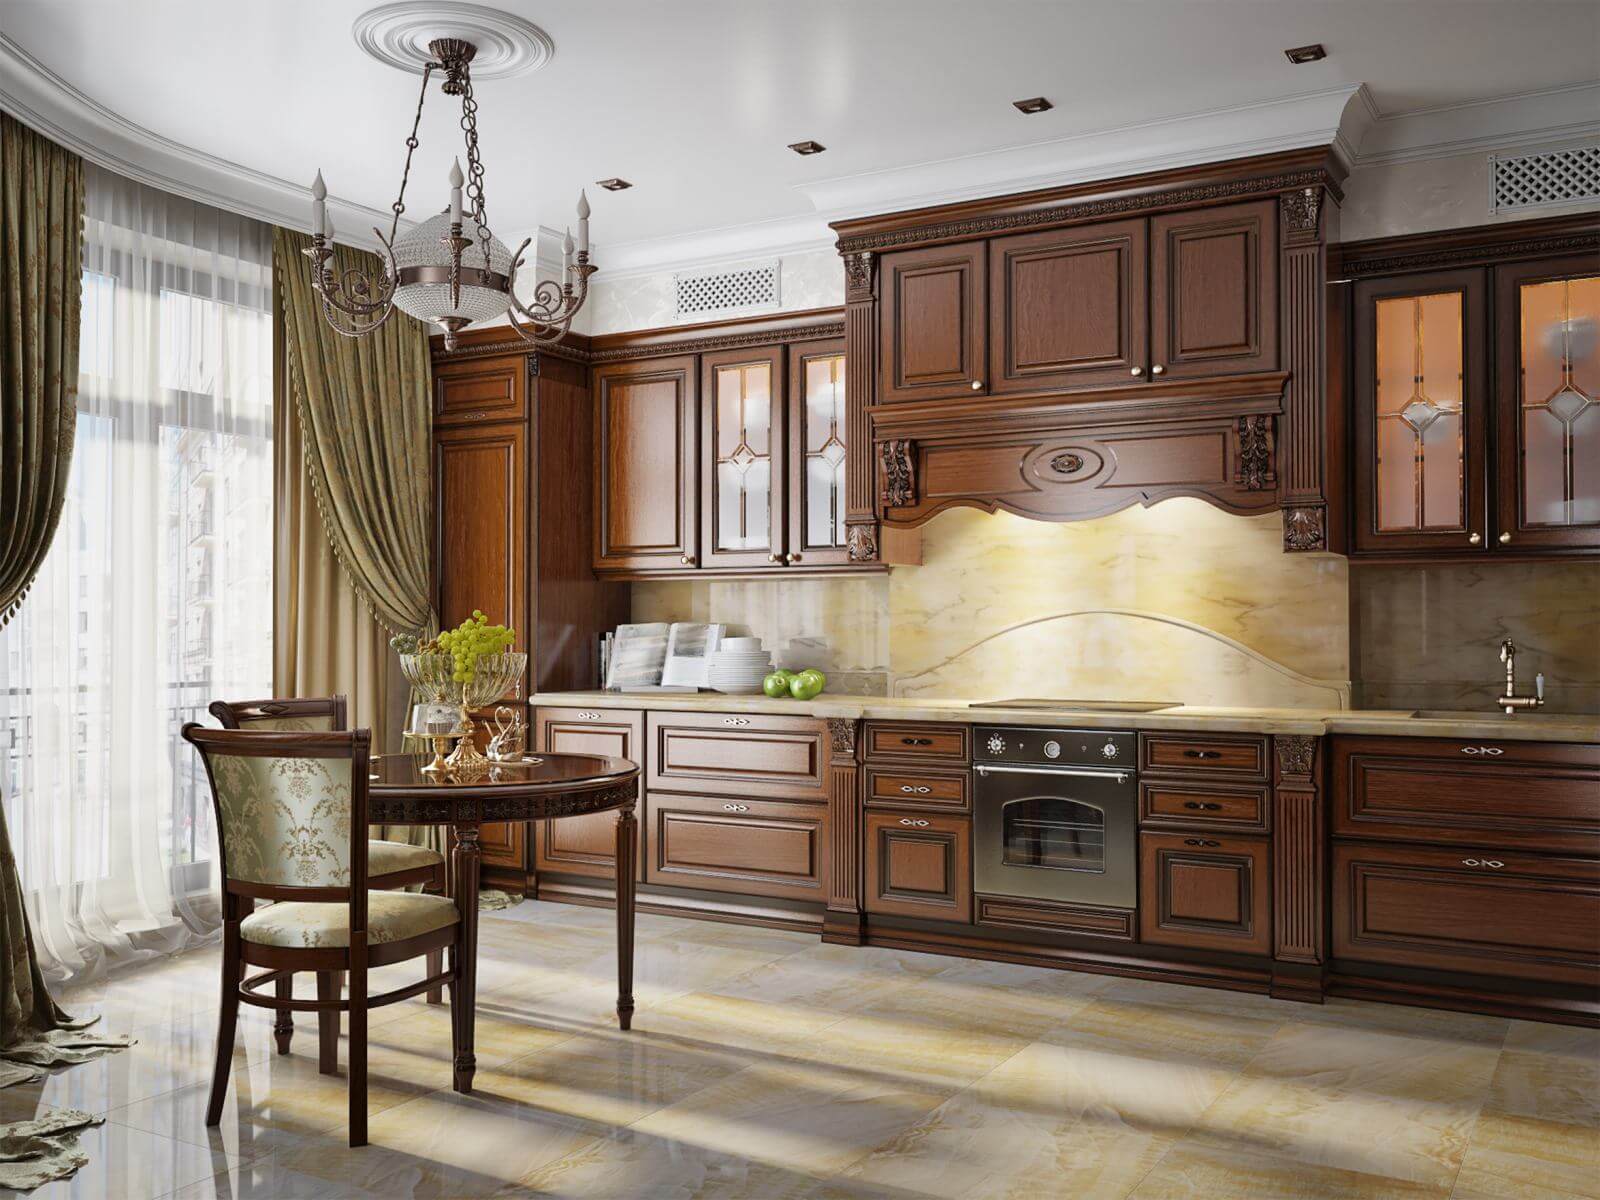 Kitchen interior in classic style. 3d rendering